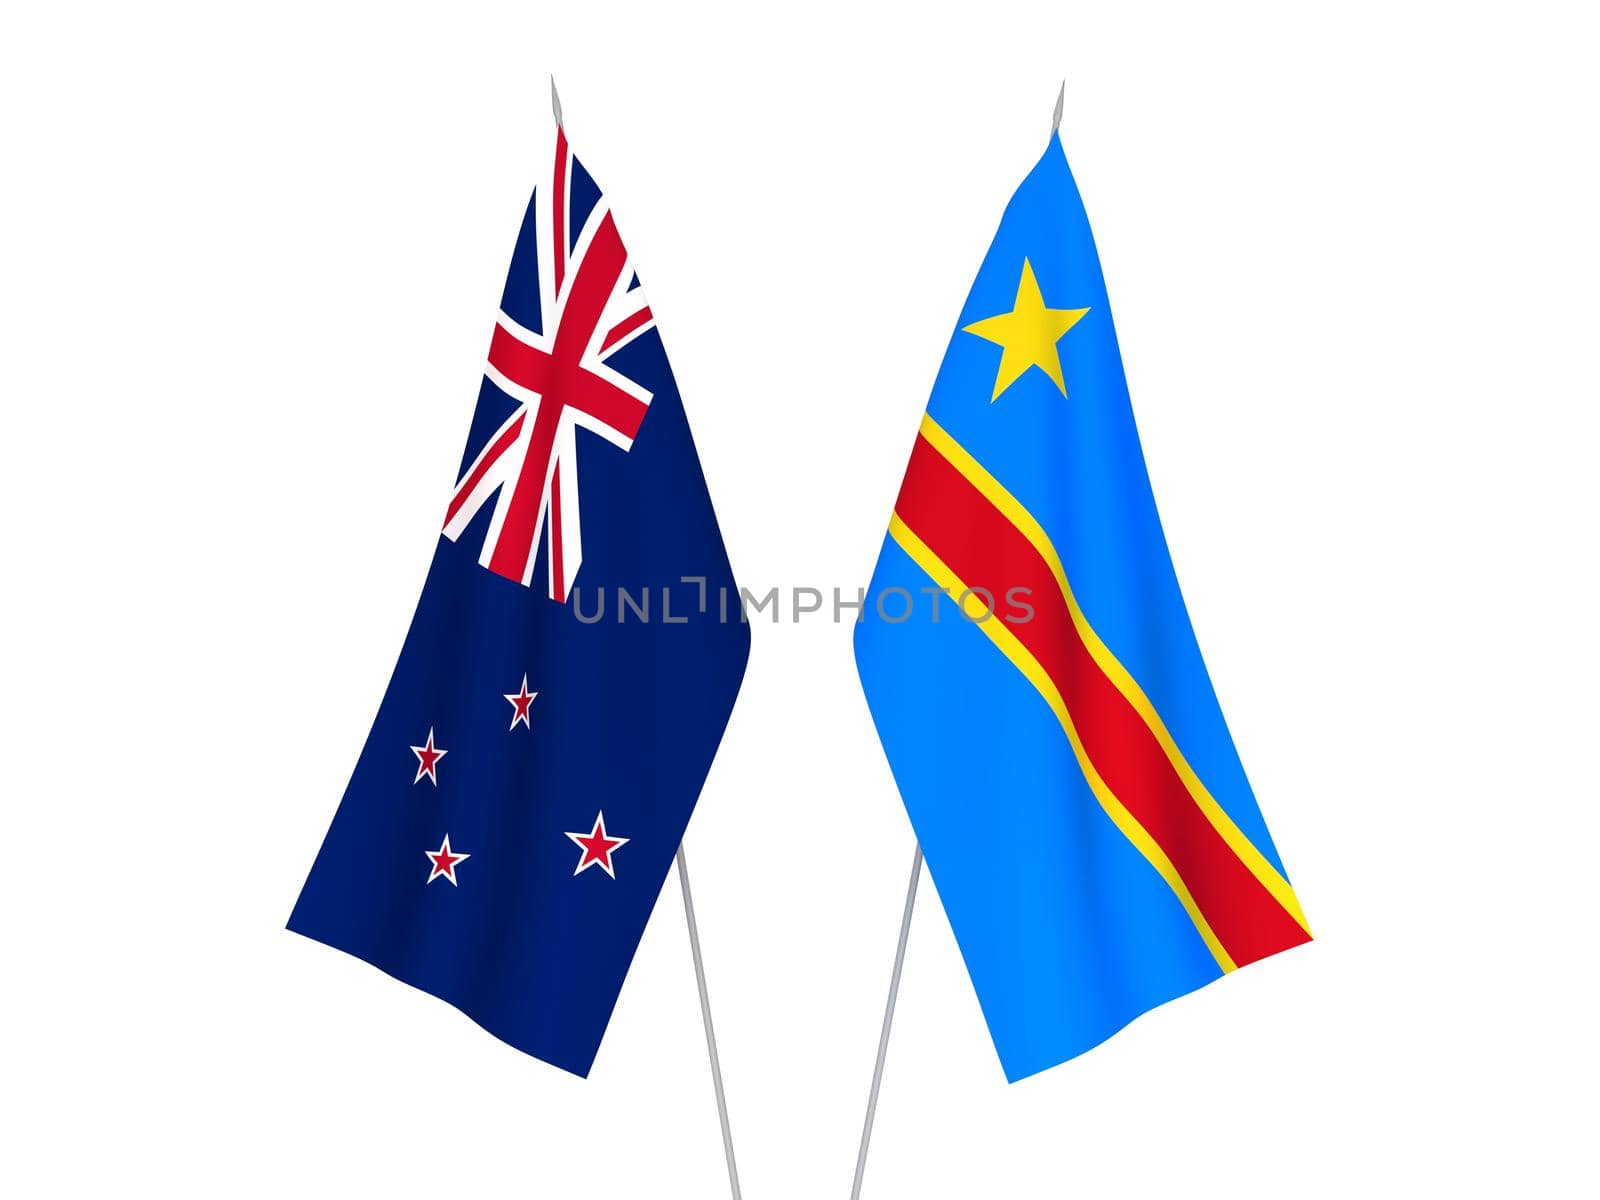 Democratic Republic of the Congo and New Zealand flags by epic33